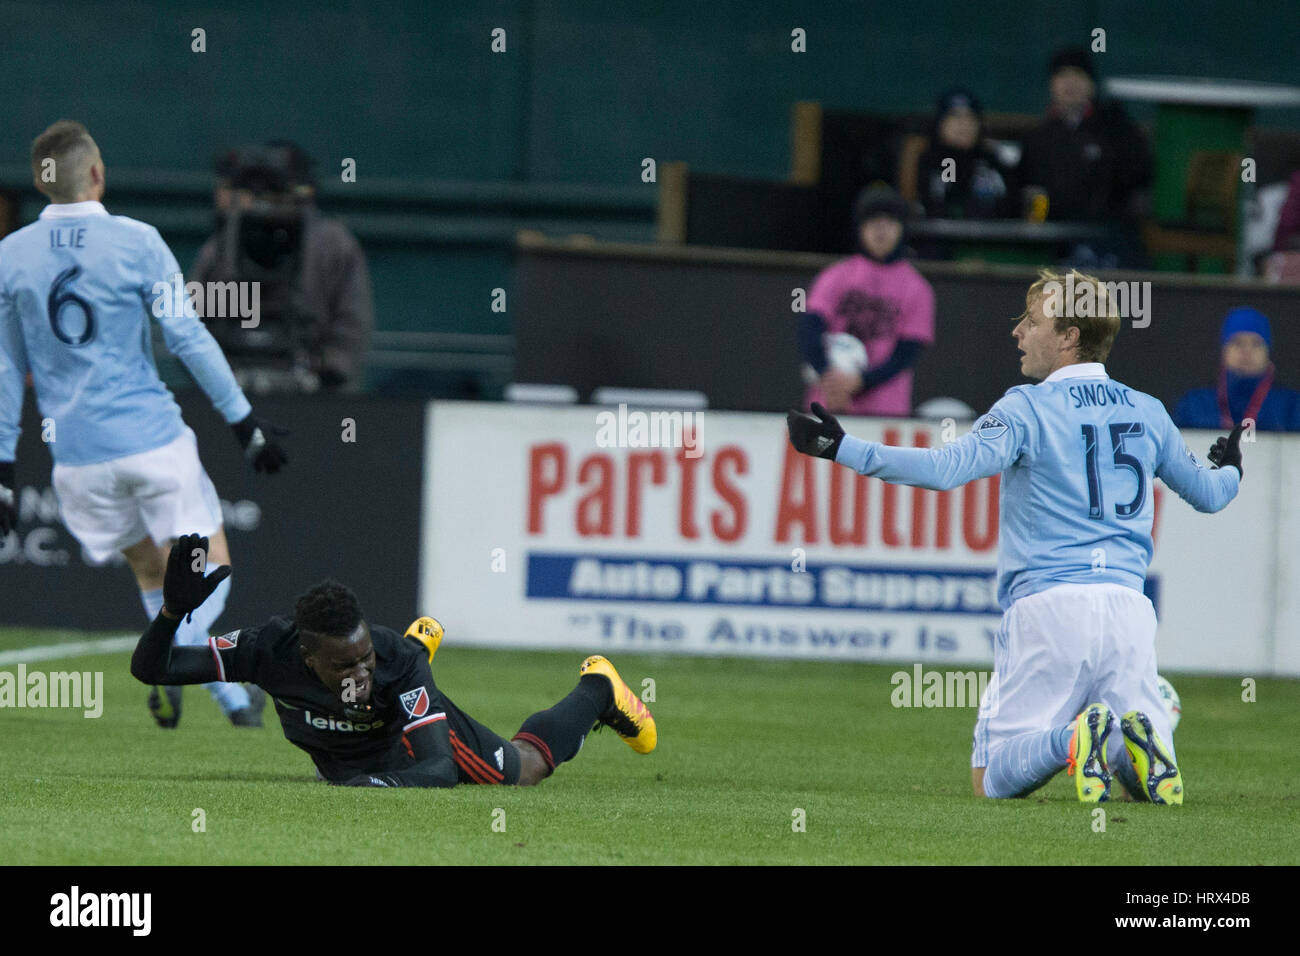 Washington, DC, USA. 04th Mar, 2017. D.C. United forward Patrick Nyarko (12) and Sporting Kansas City defender Seth Sinovic (15) react after a contentious tackle by Nyarko which resulted in a penalty at RFK Stadium in Washington, DC on Saturday March 4, 2 Stock Photo